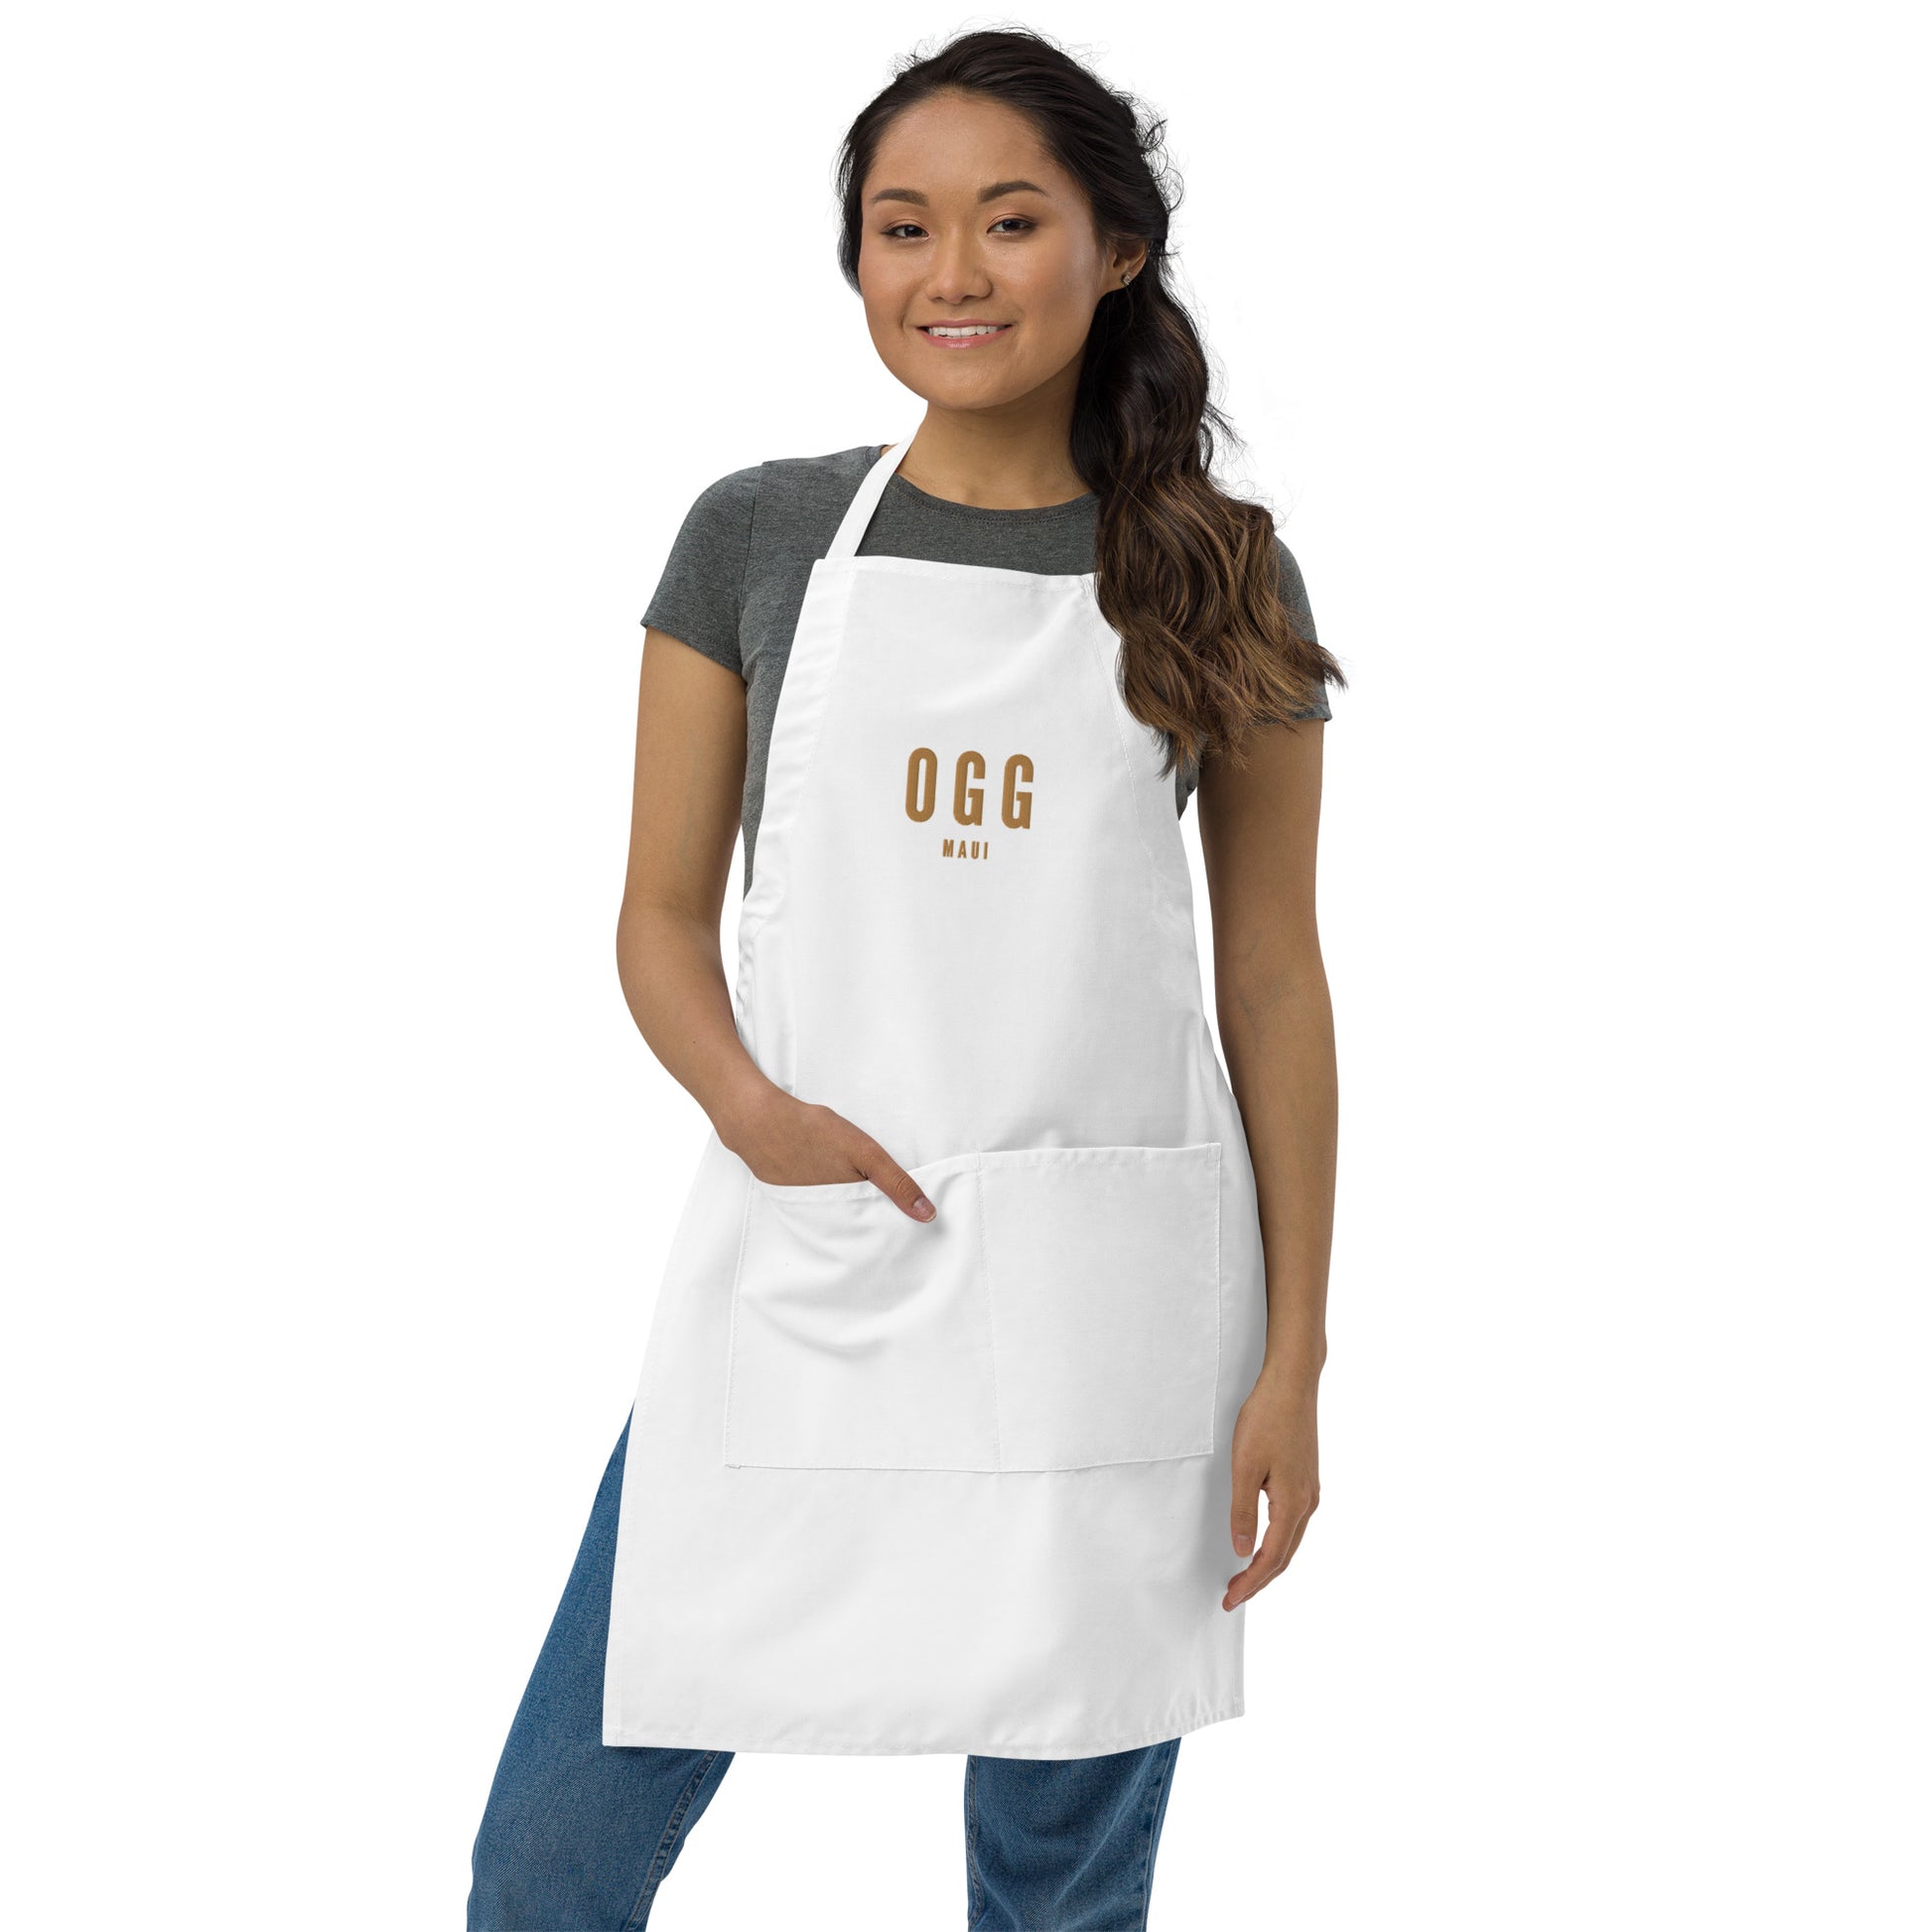 City Embroidered Apron - Old Gold • OGG Maui • YHM Designs - Image 10